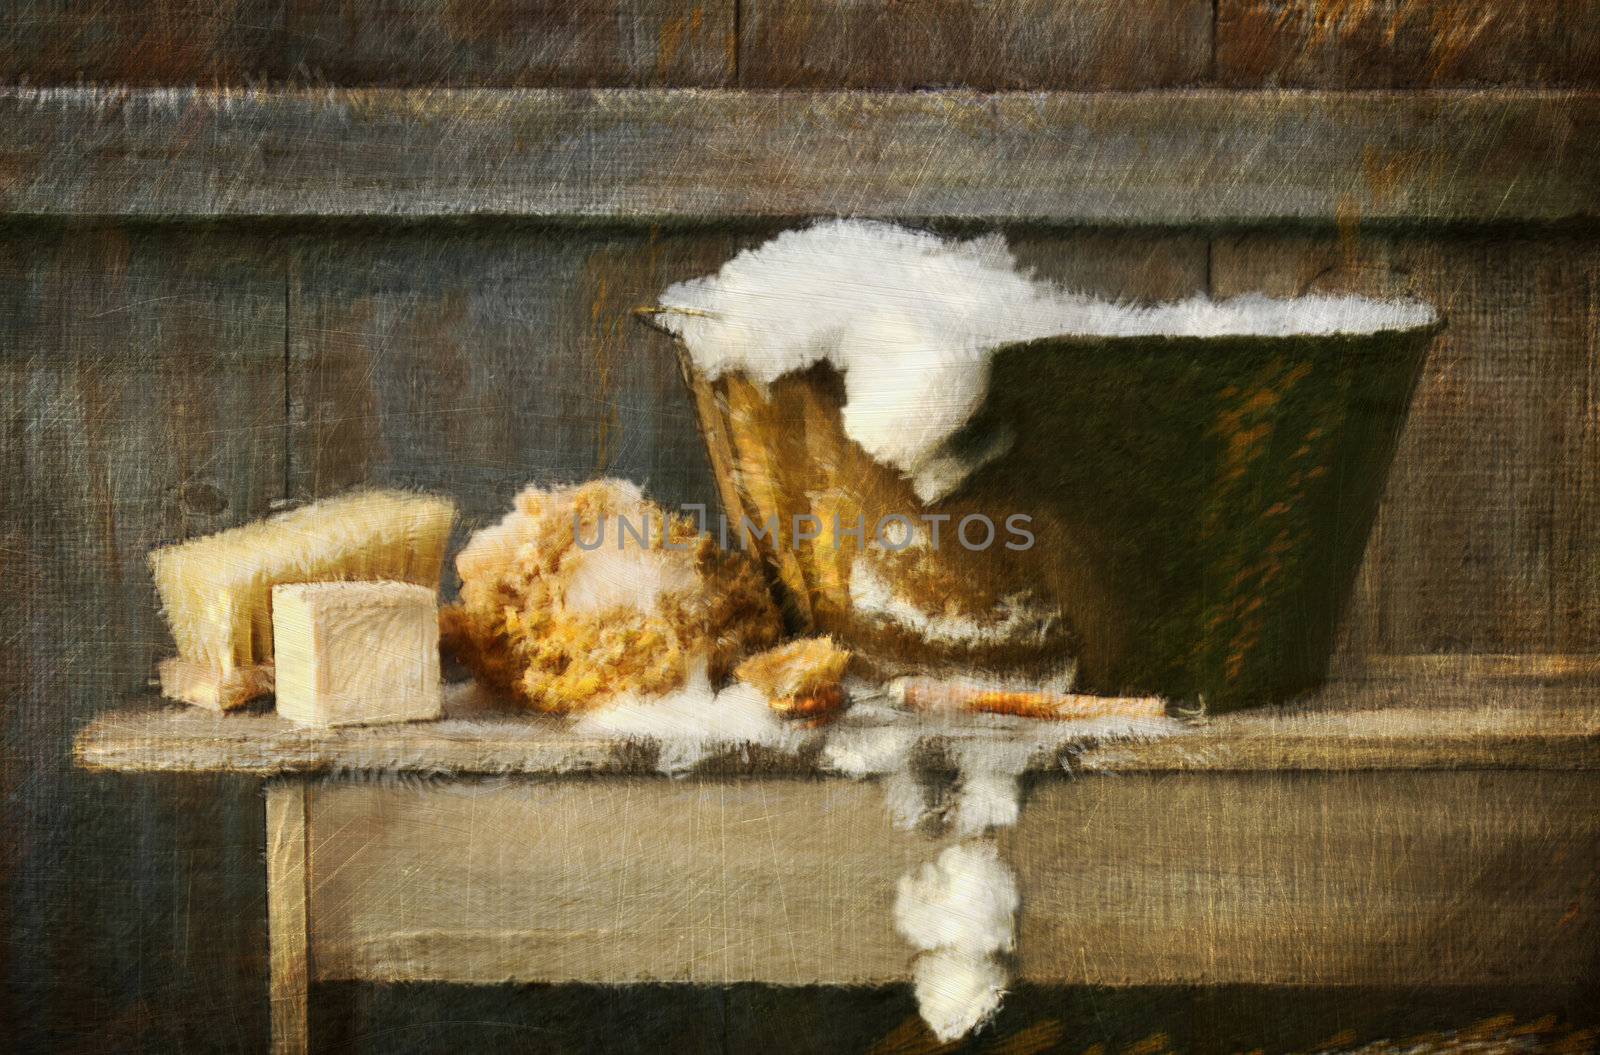 Digital rendered painting of old wash tub with soap on bench